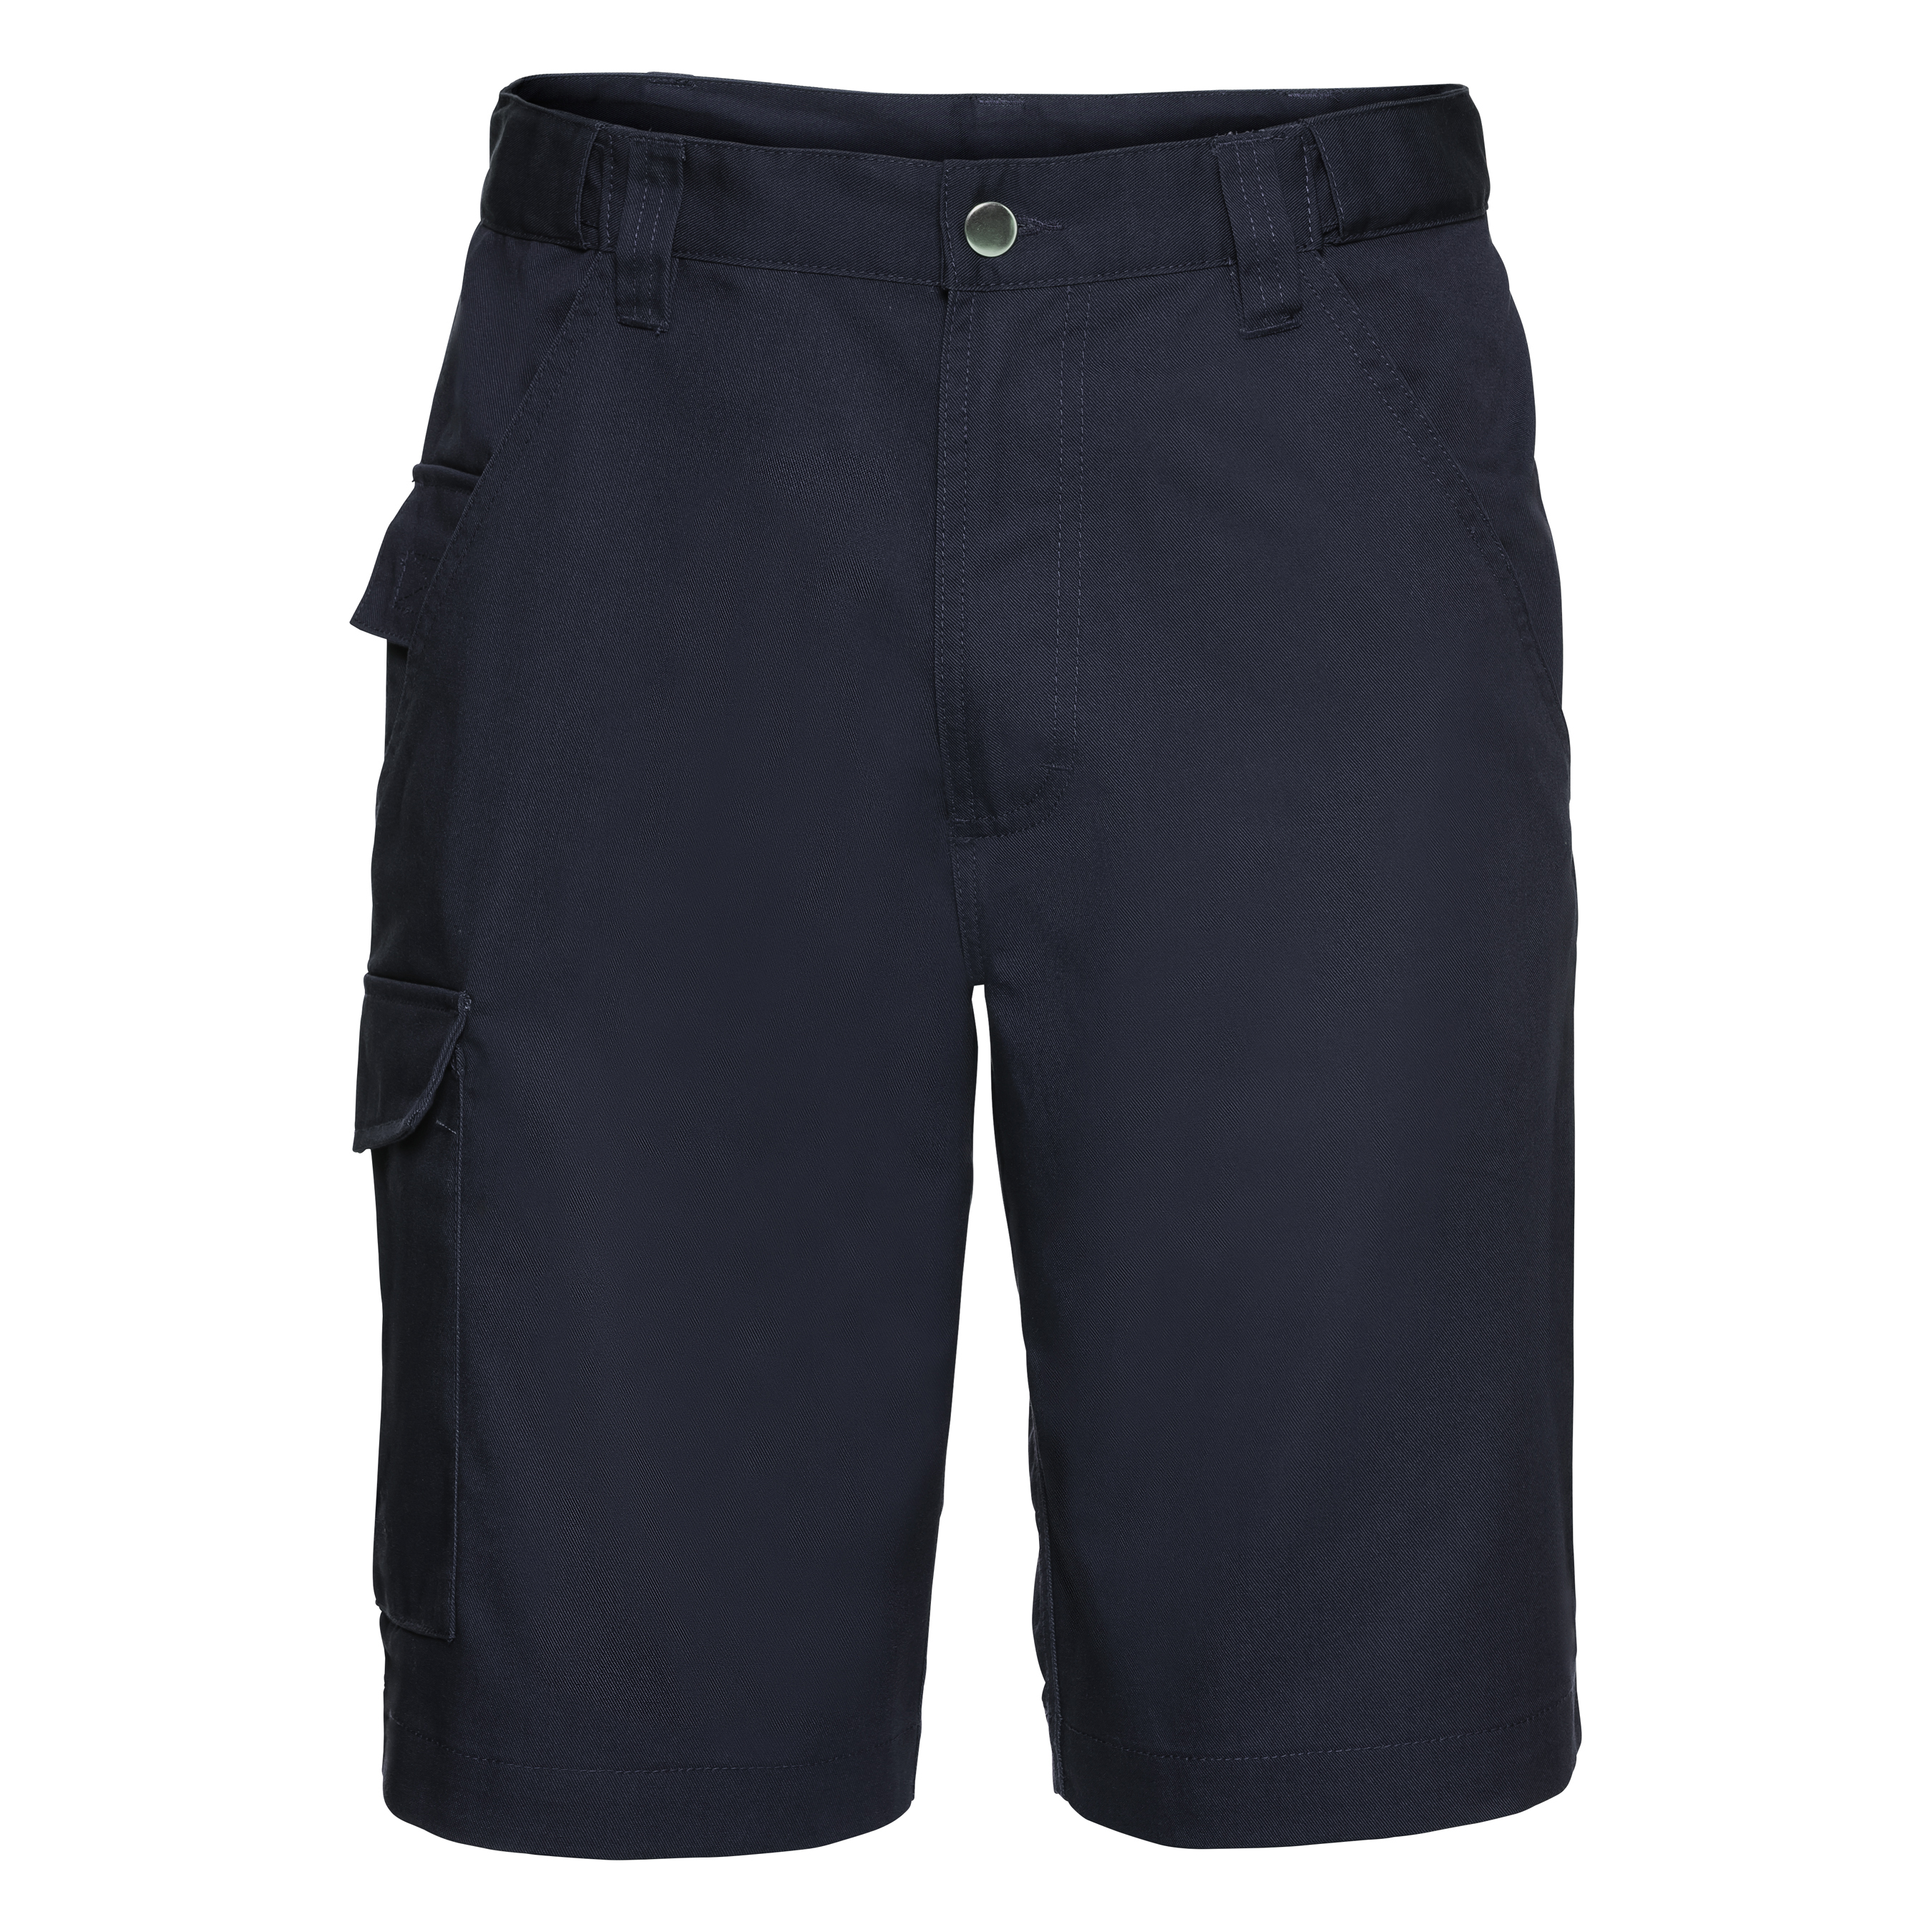 ax-httpswebsystems.s3.amazonaws.comtmp_for_downloadrussell-polycotton-twill-workwear-shorts-french-navy.jpeg.jpg